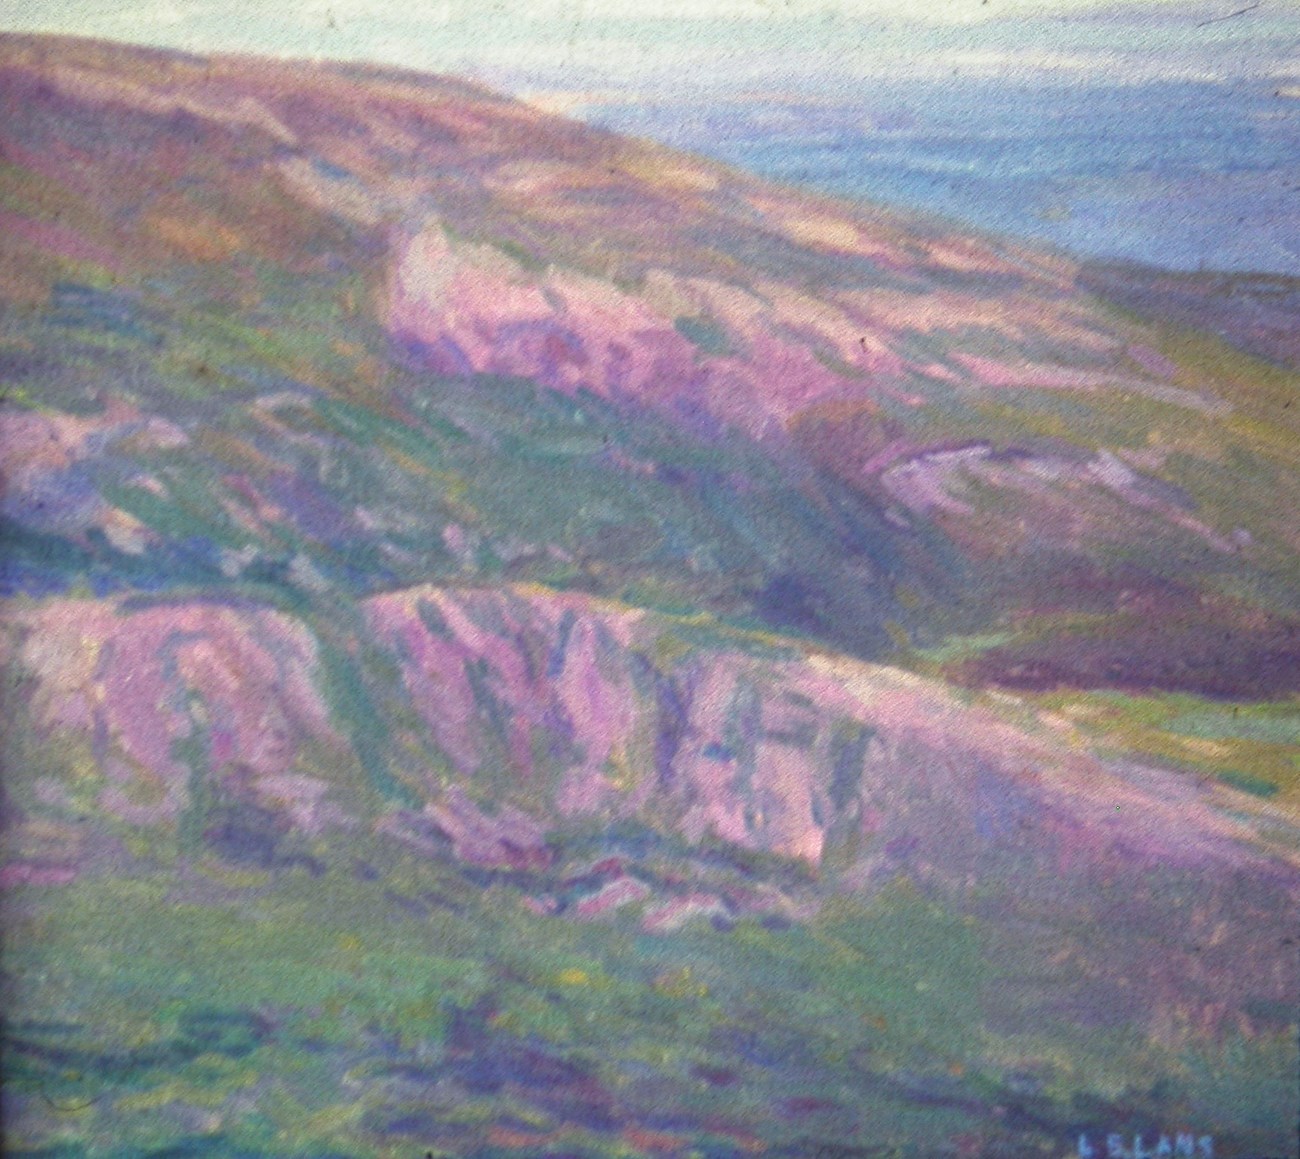 Oil Painting of the Bubbles. Mostly pinks, Blues, and Greens used. Image is of a landscape looking towards the ocean with sloping land in the foreground.